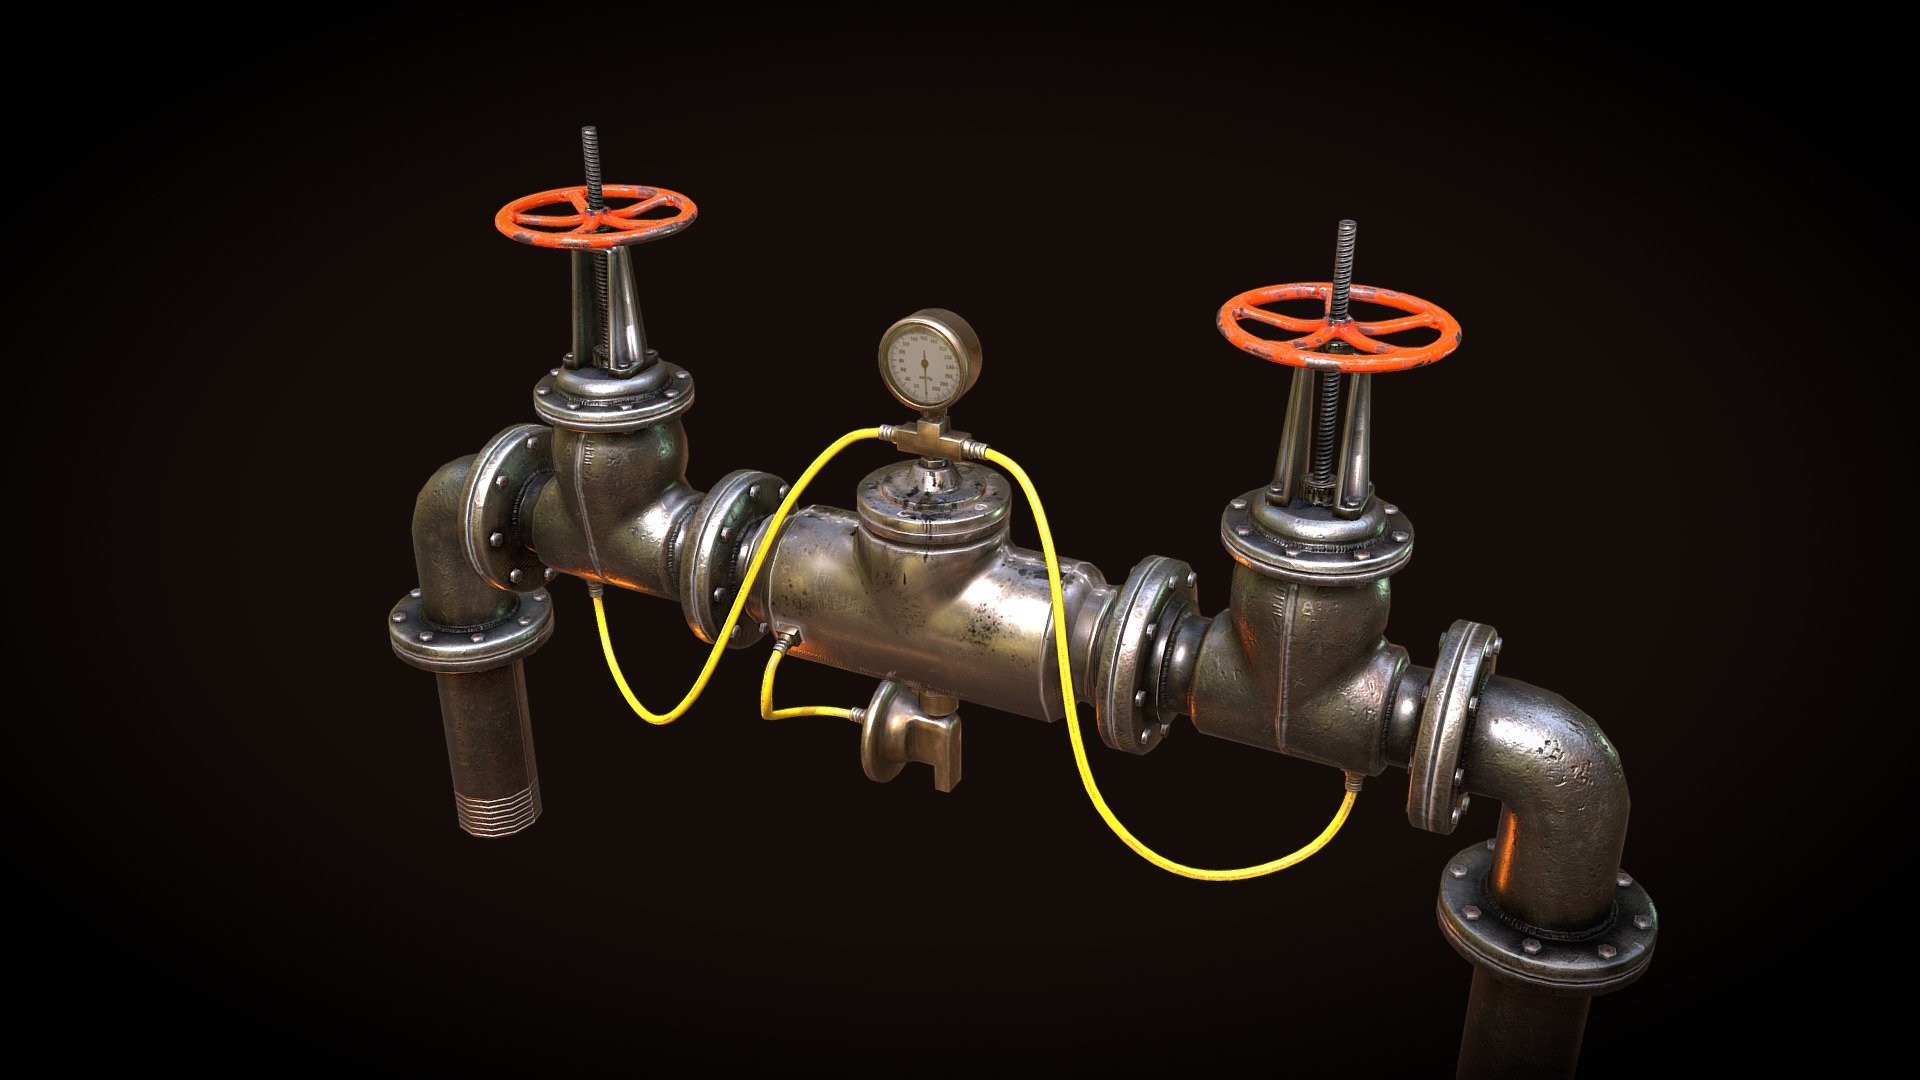 Universal constructor of  Oil pipes and pipeline. Low Poly Game Backflow  Oil Pipe.
2048x2048 texture size ( difuse, normal, specular ) map PSD file included Maya and Blender format : 3DsMax, Maya, OBJ, FBX - the package includes - bolts, screws, turns, valves, pins, pipes and other pipeline parts.

Please Visit: http://arunjosevfx.blogspot.com/ - Oil Pipes Joints and Valve - 3D model by Arun Jose Chellan (@arunjose) 3d model